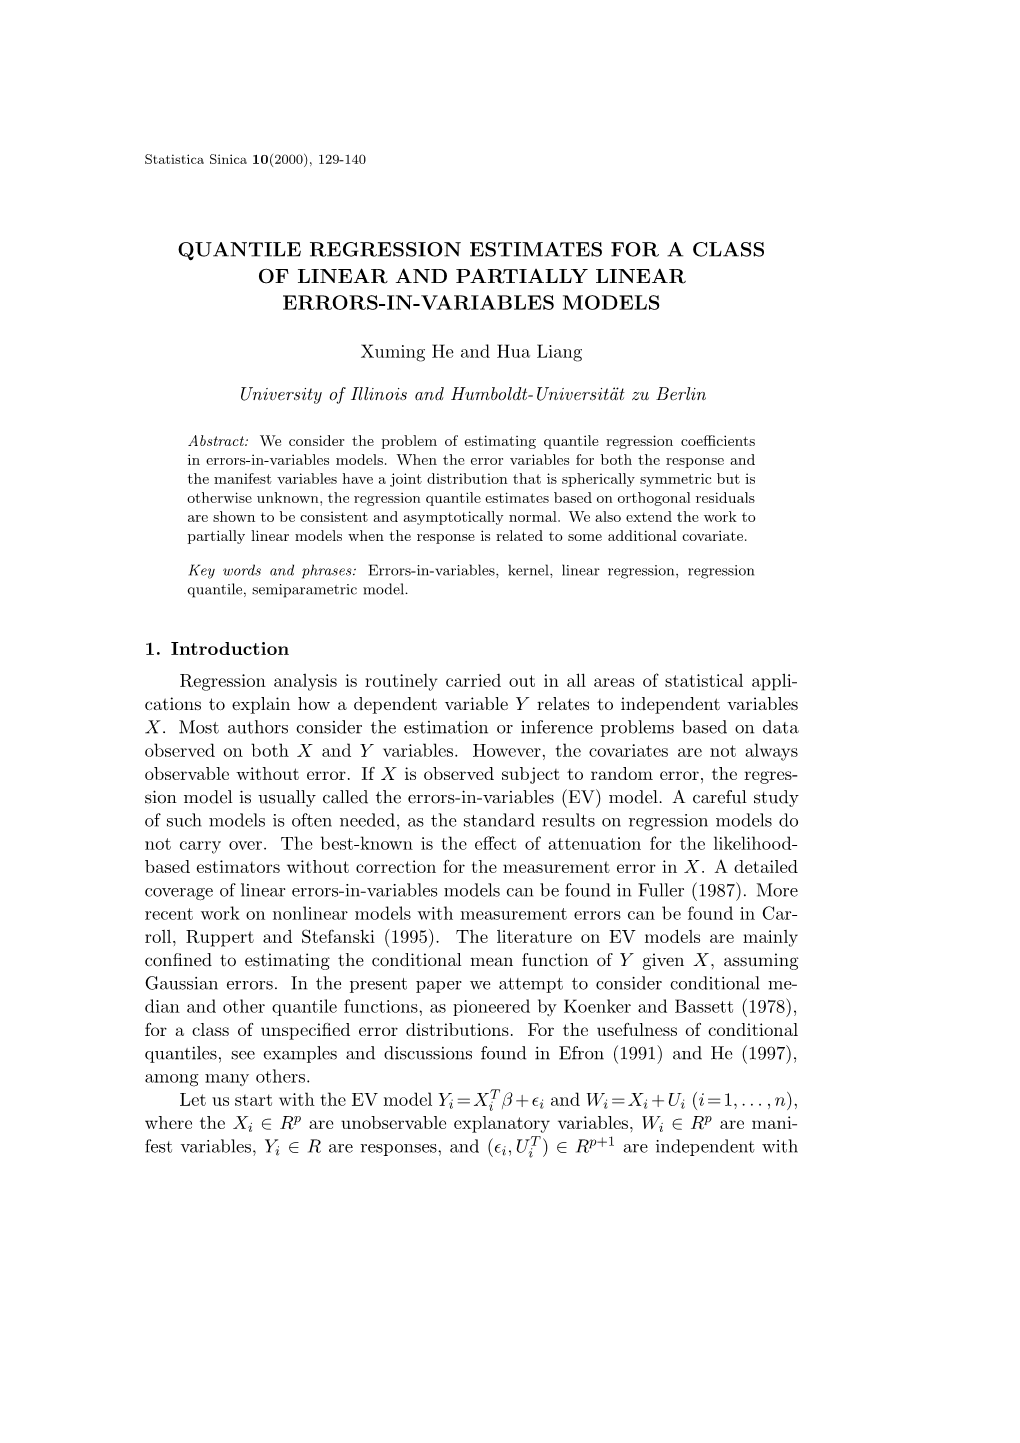 Quantile Regression Estimates for a Class of Linear and Partially Linear Errors-In-Variables Models